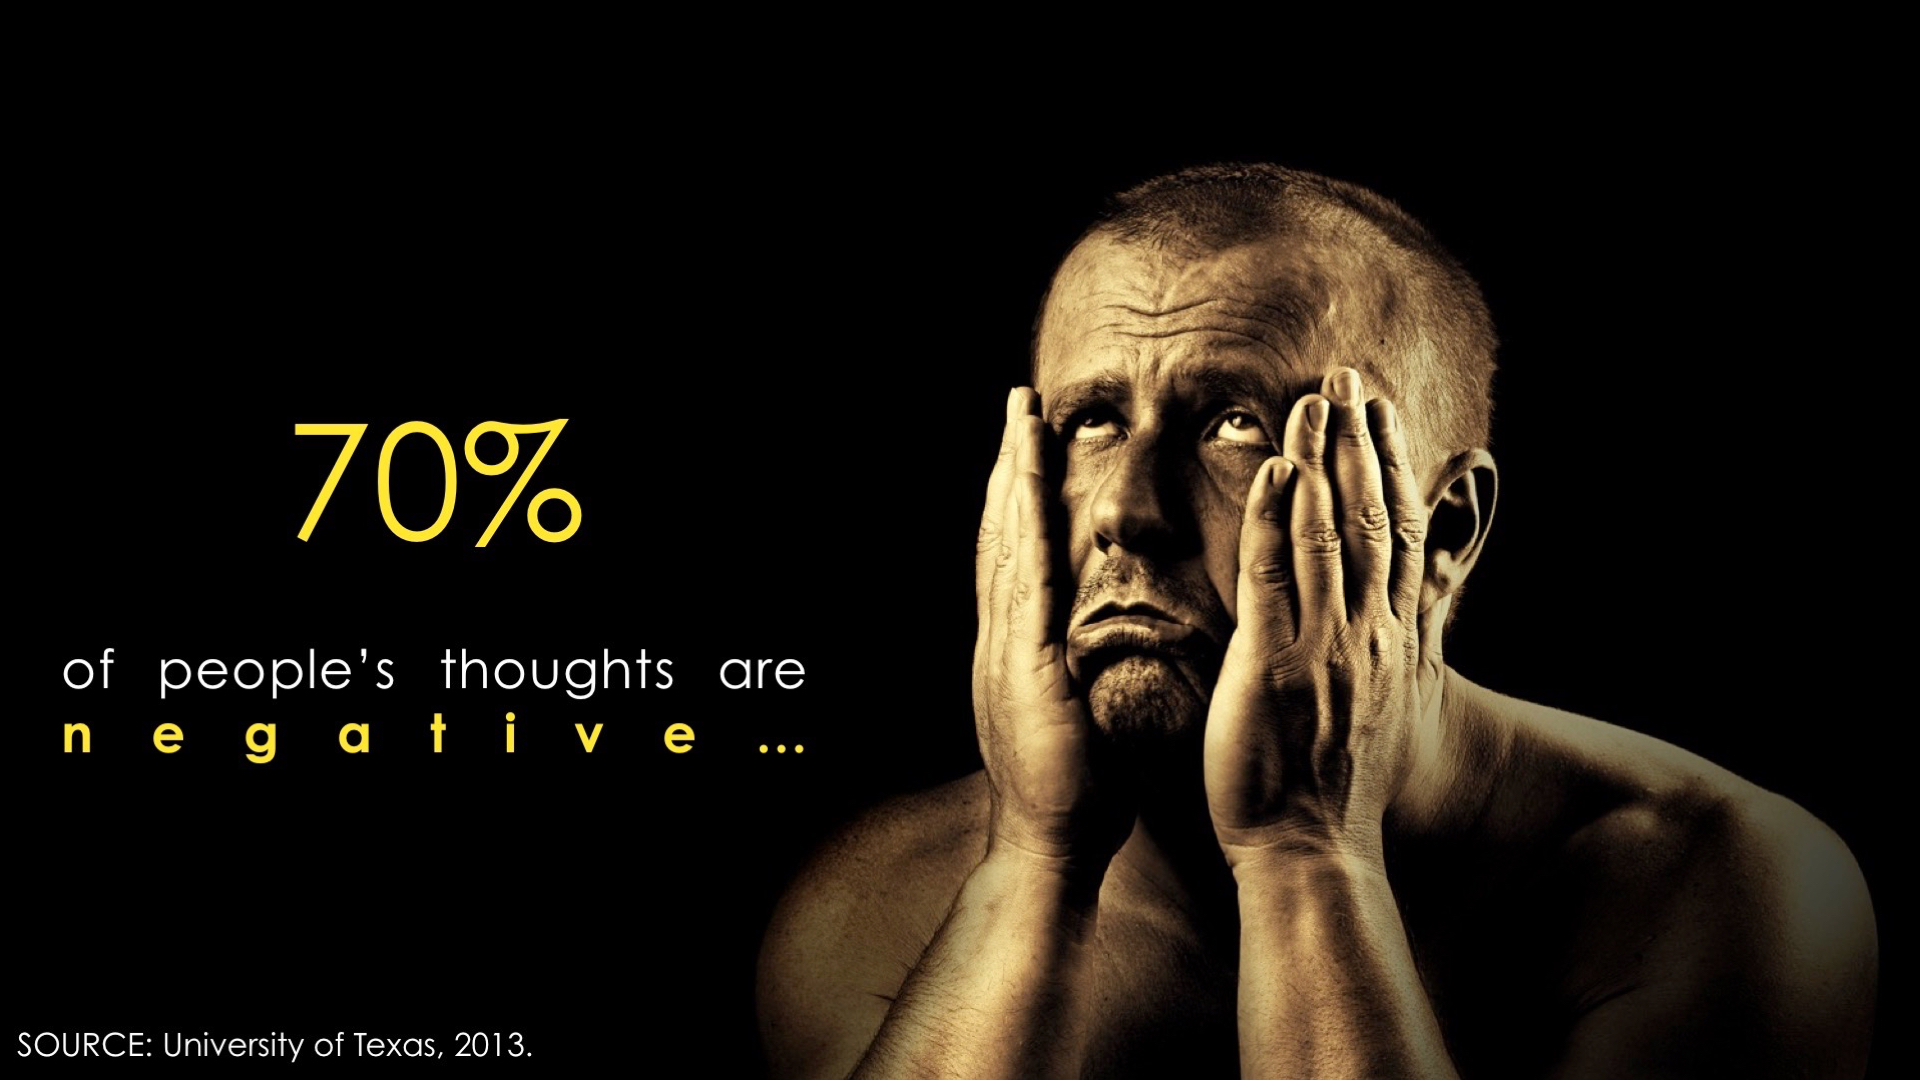 Scientific Study shows that 70% of our thoughts are negative leading to depression, illnesses and business high costs